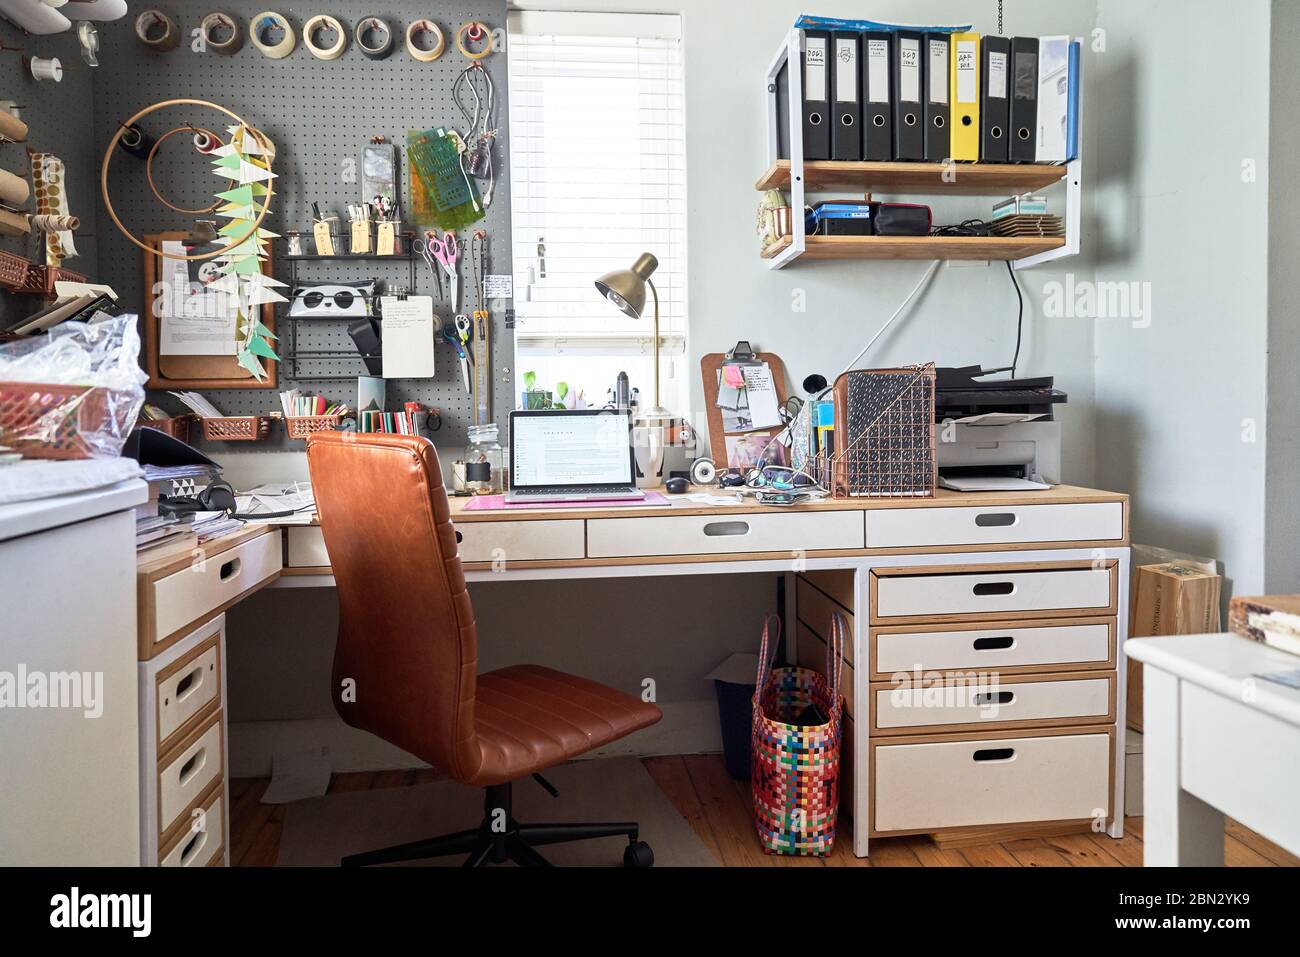 Laptop on desk in creative home office Stock Photo